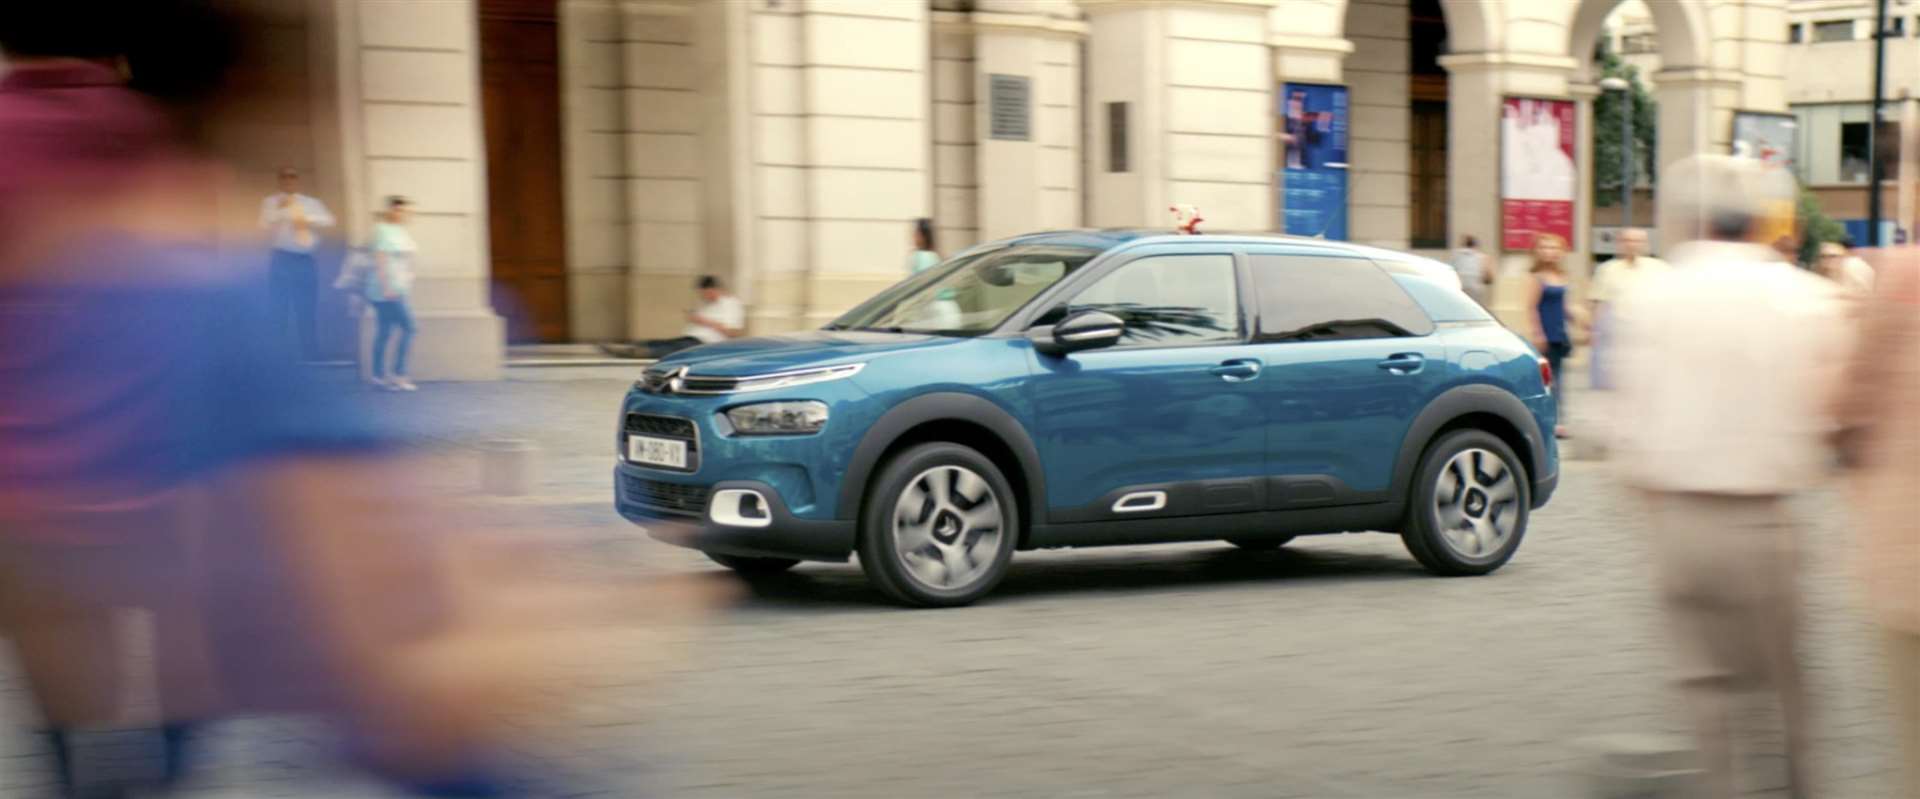 The C4 Cactus still manages to stand out in the street (2727263)